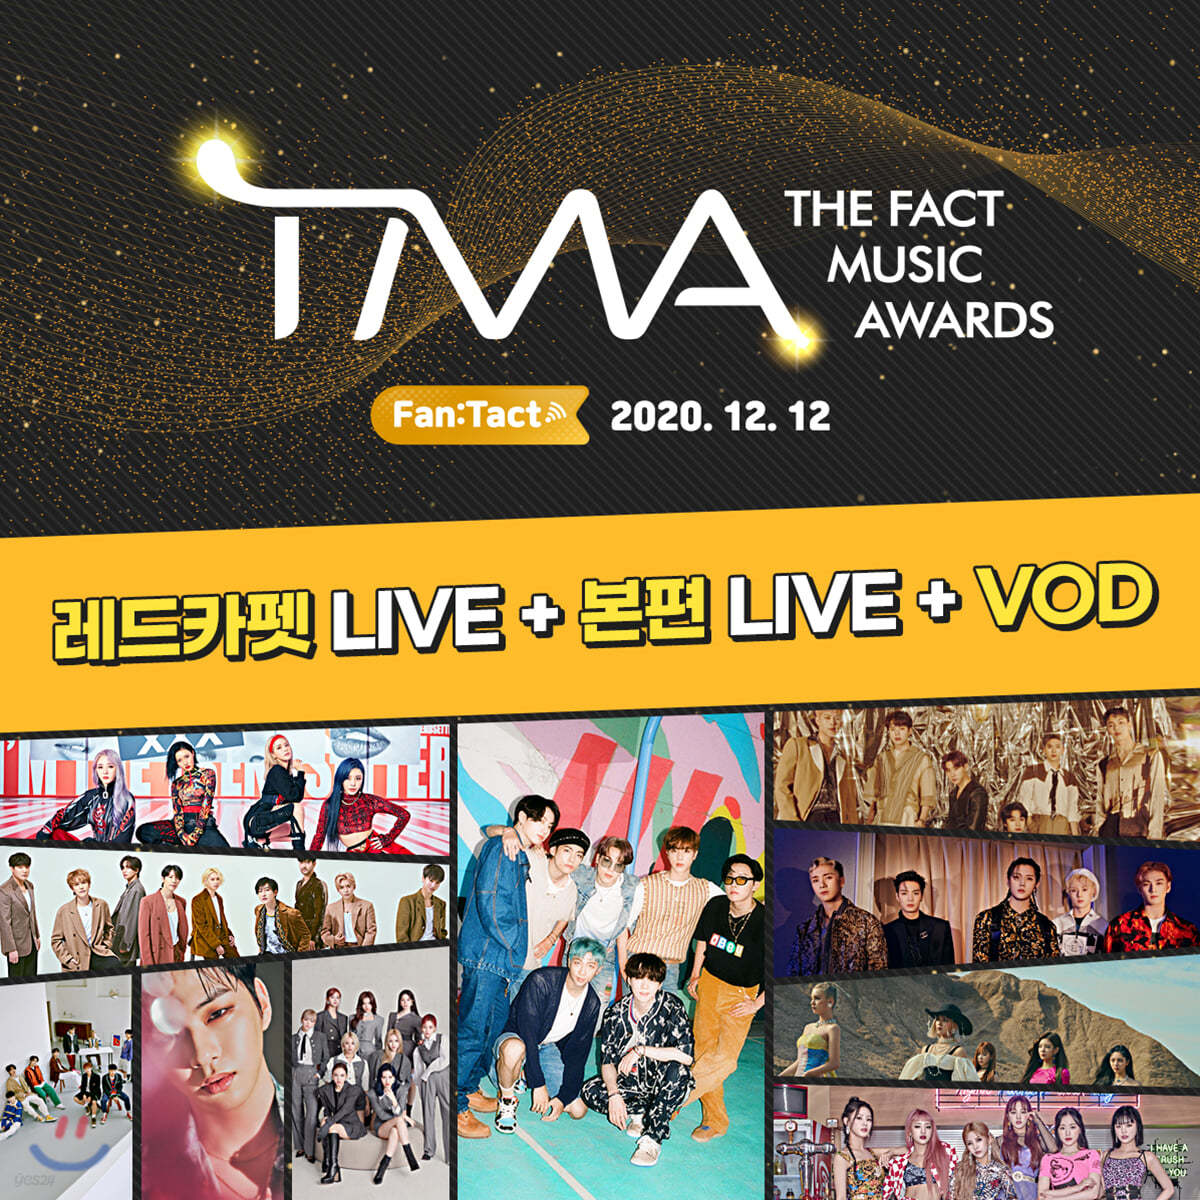 2020 THE FACT MUSIC AWARDS [FAN:TACT] LIVE + VOD